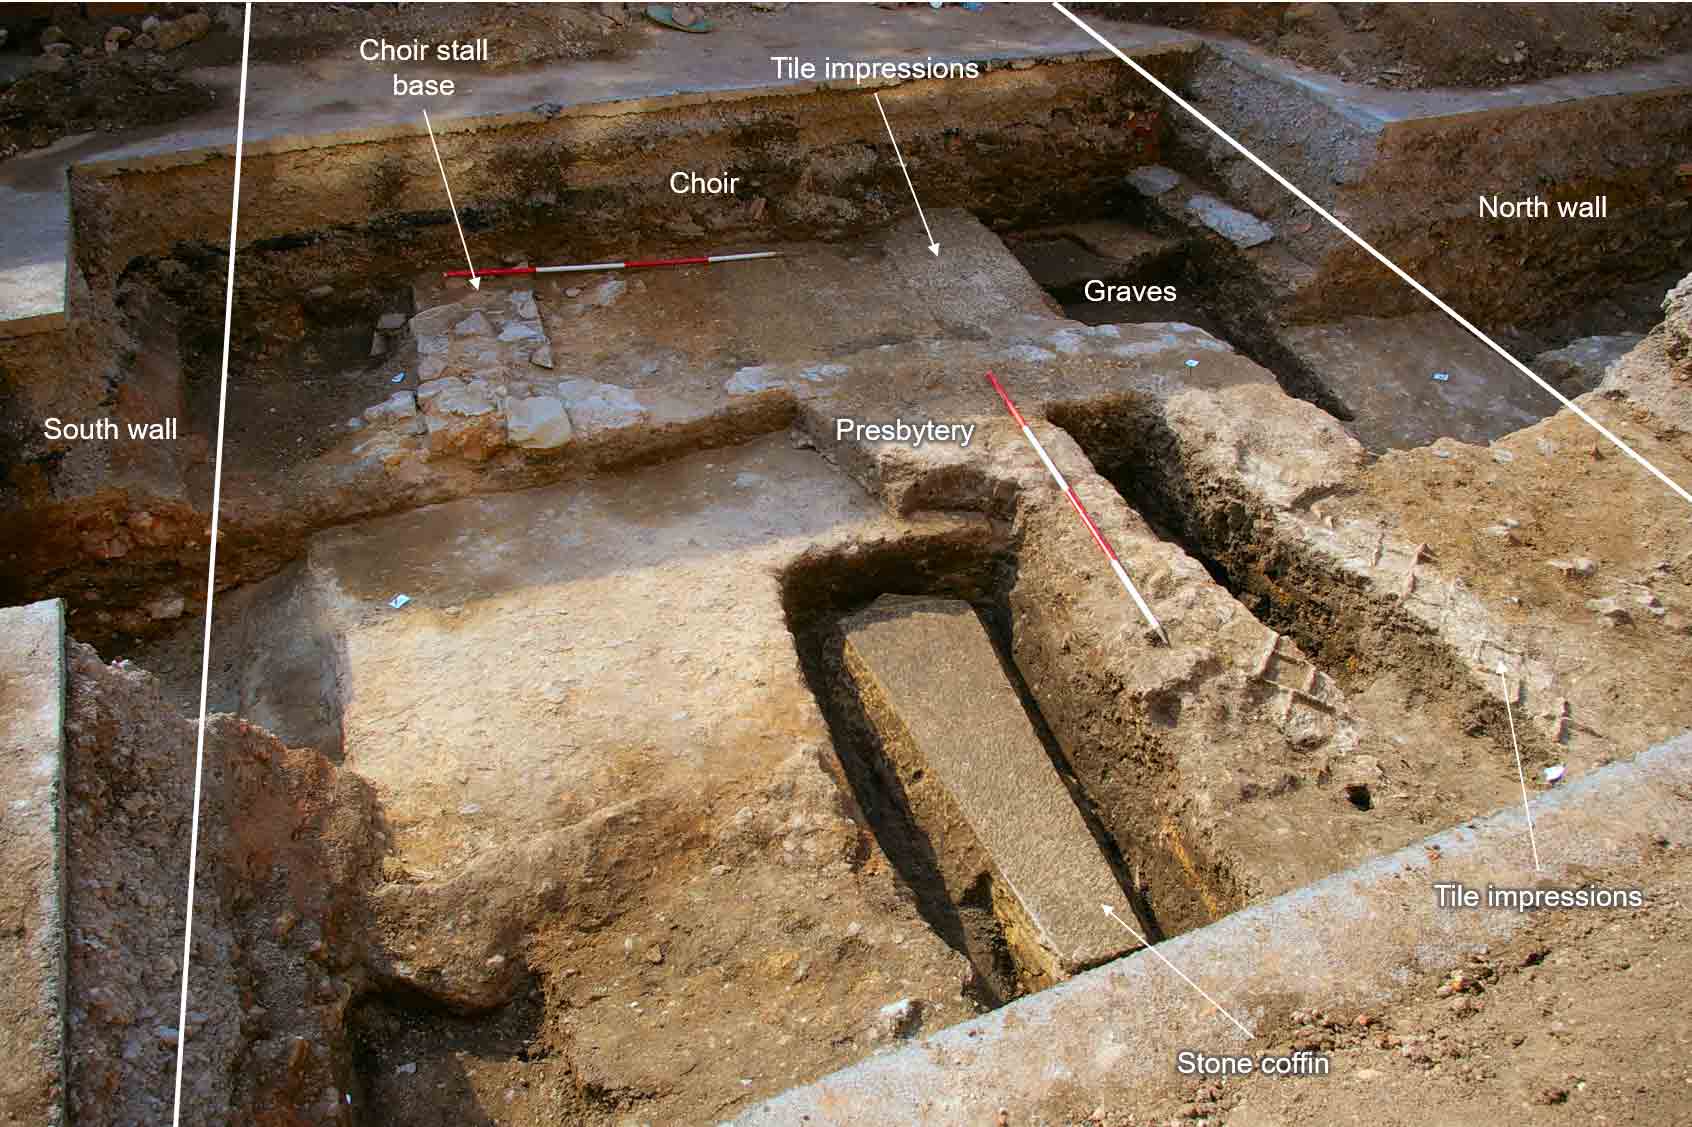 Trench 3 (G-H) fully excavated, looking west. A medieval stone coffin and tile impressions in the presbytery of the church can be seen in the foreground, with the remains of the choir stalls behind.